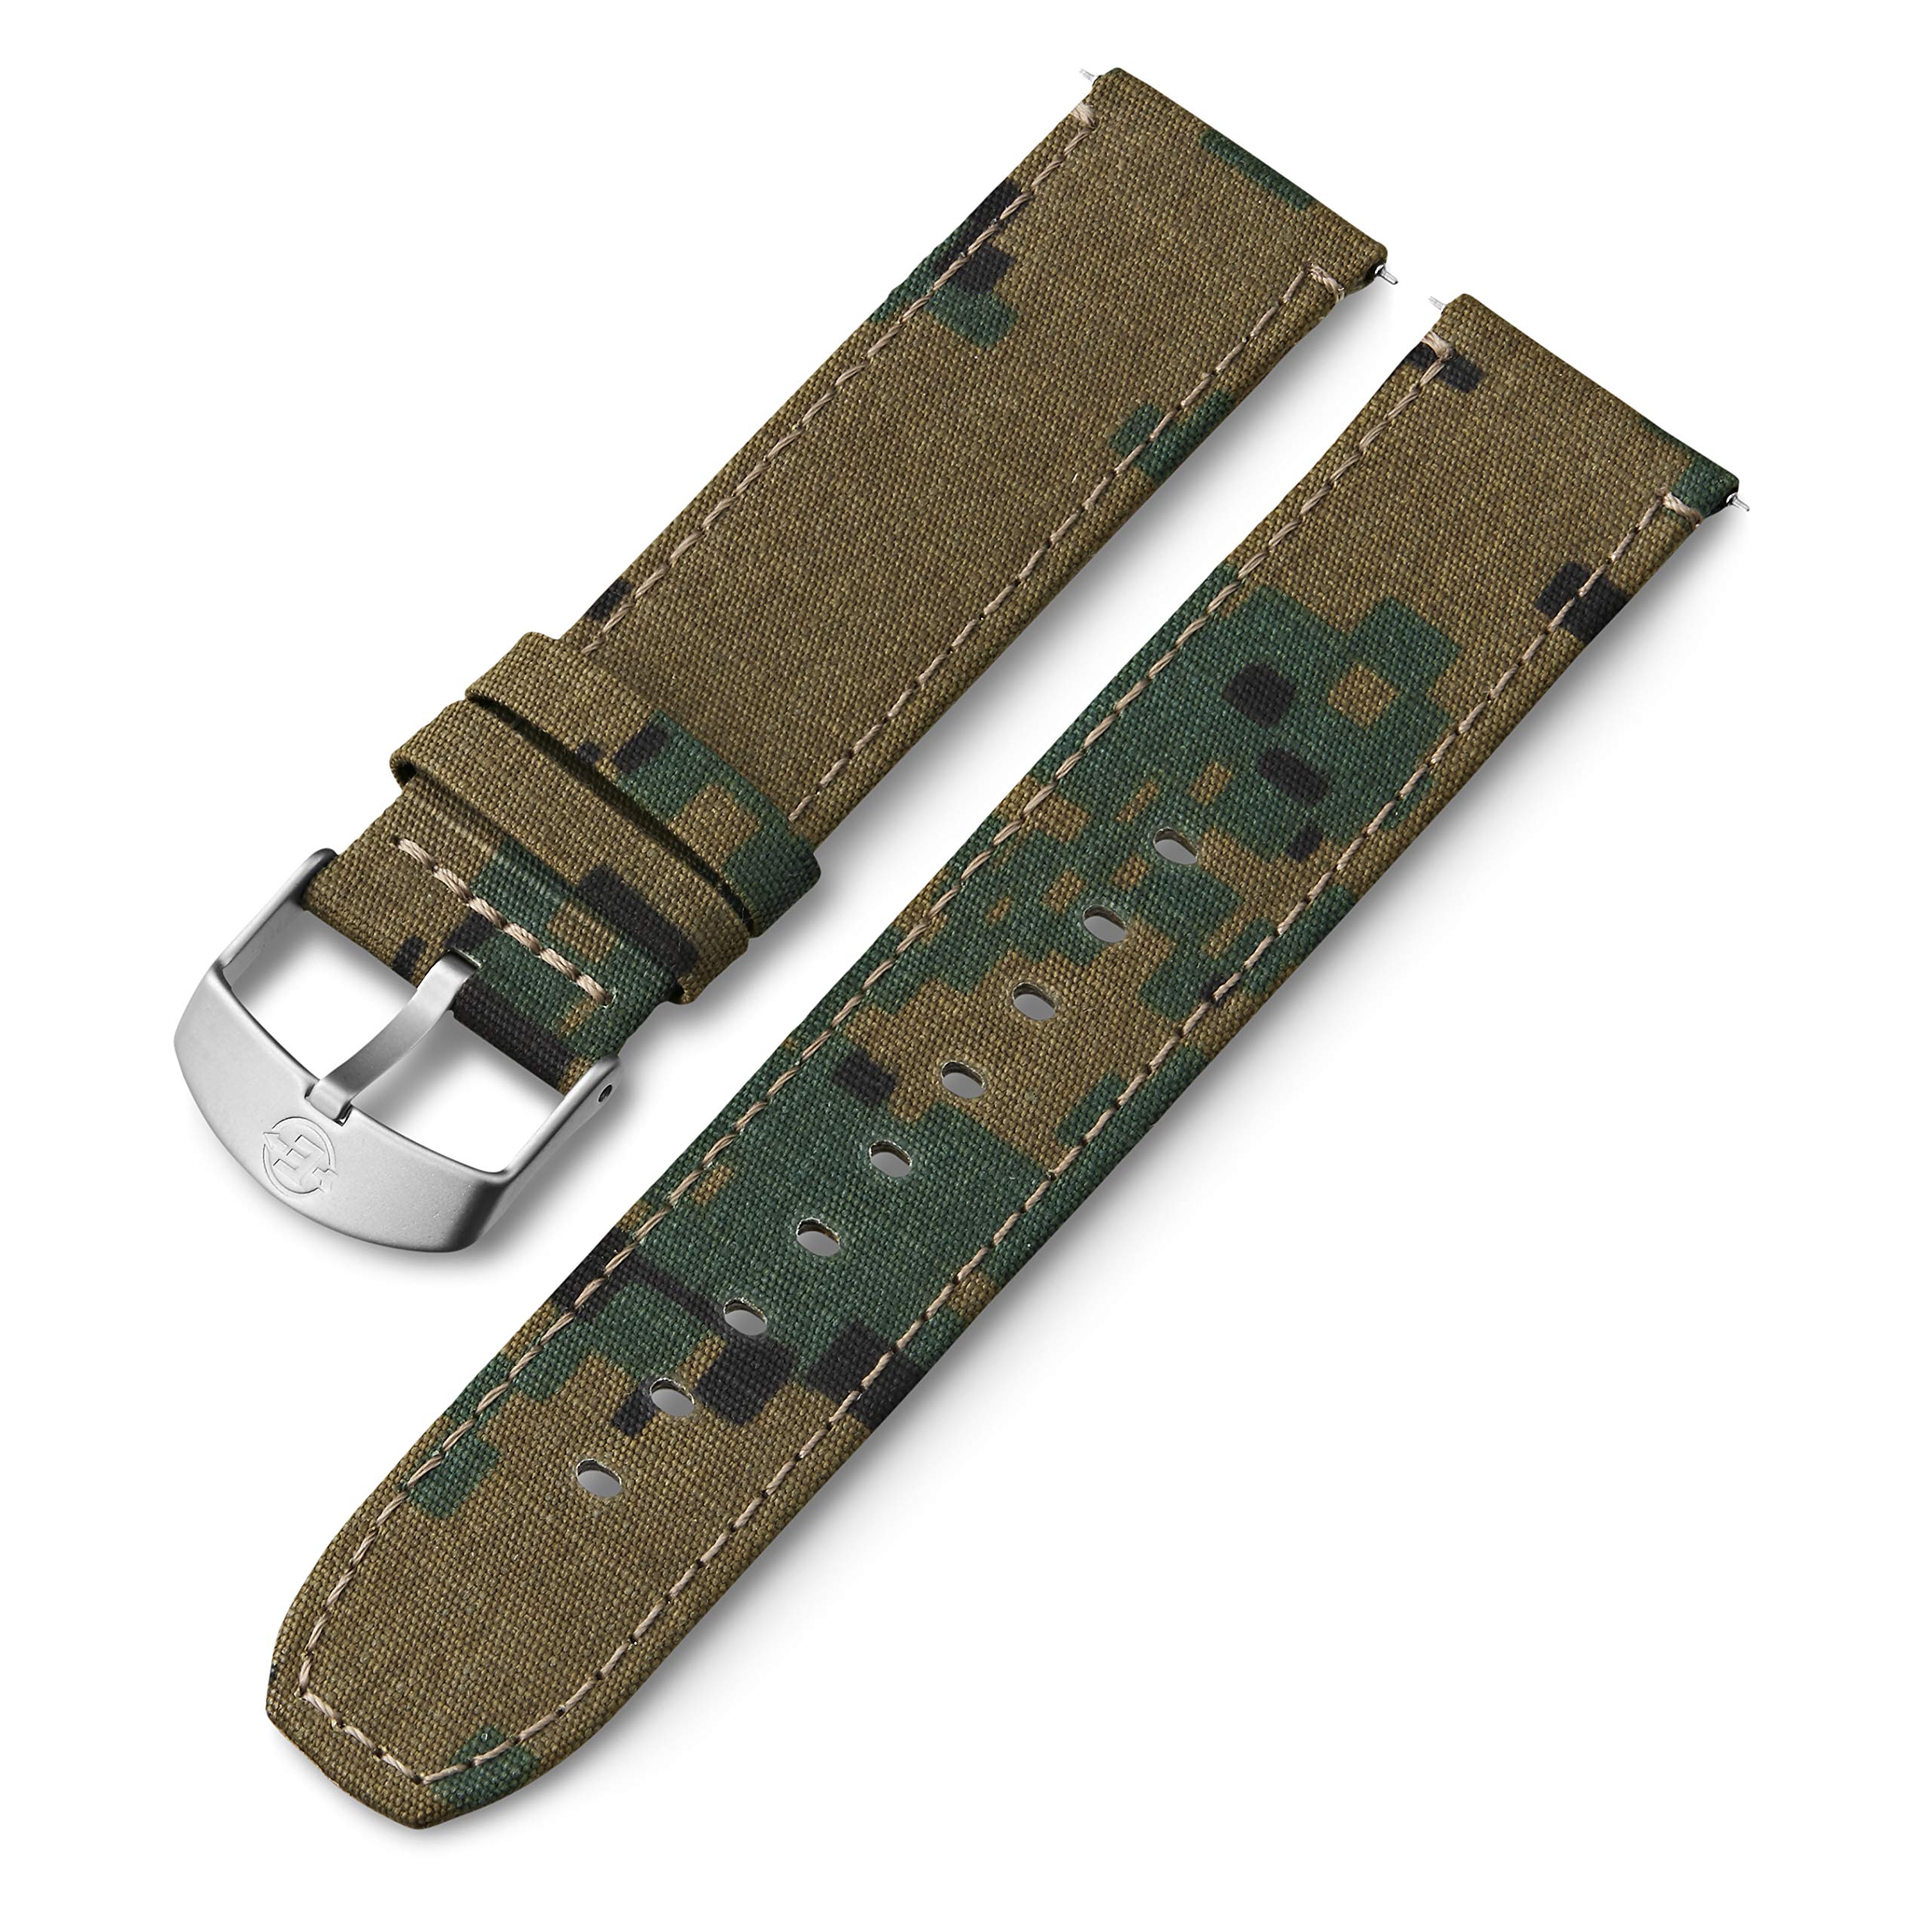 Timex 22mm Fabric Strap – Green Digital Camo with Silver-Tone Buckle